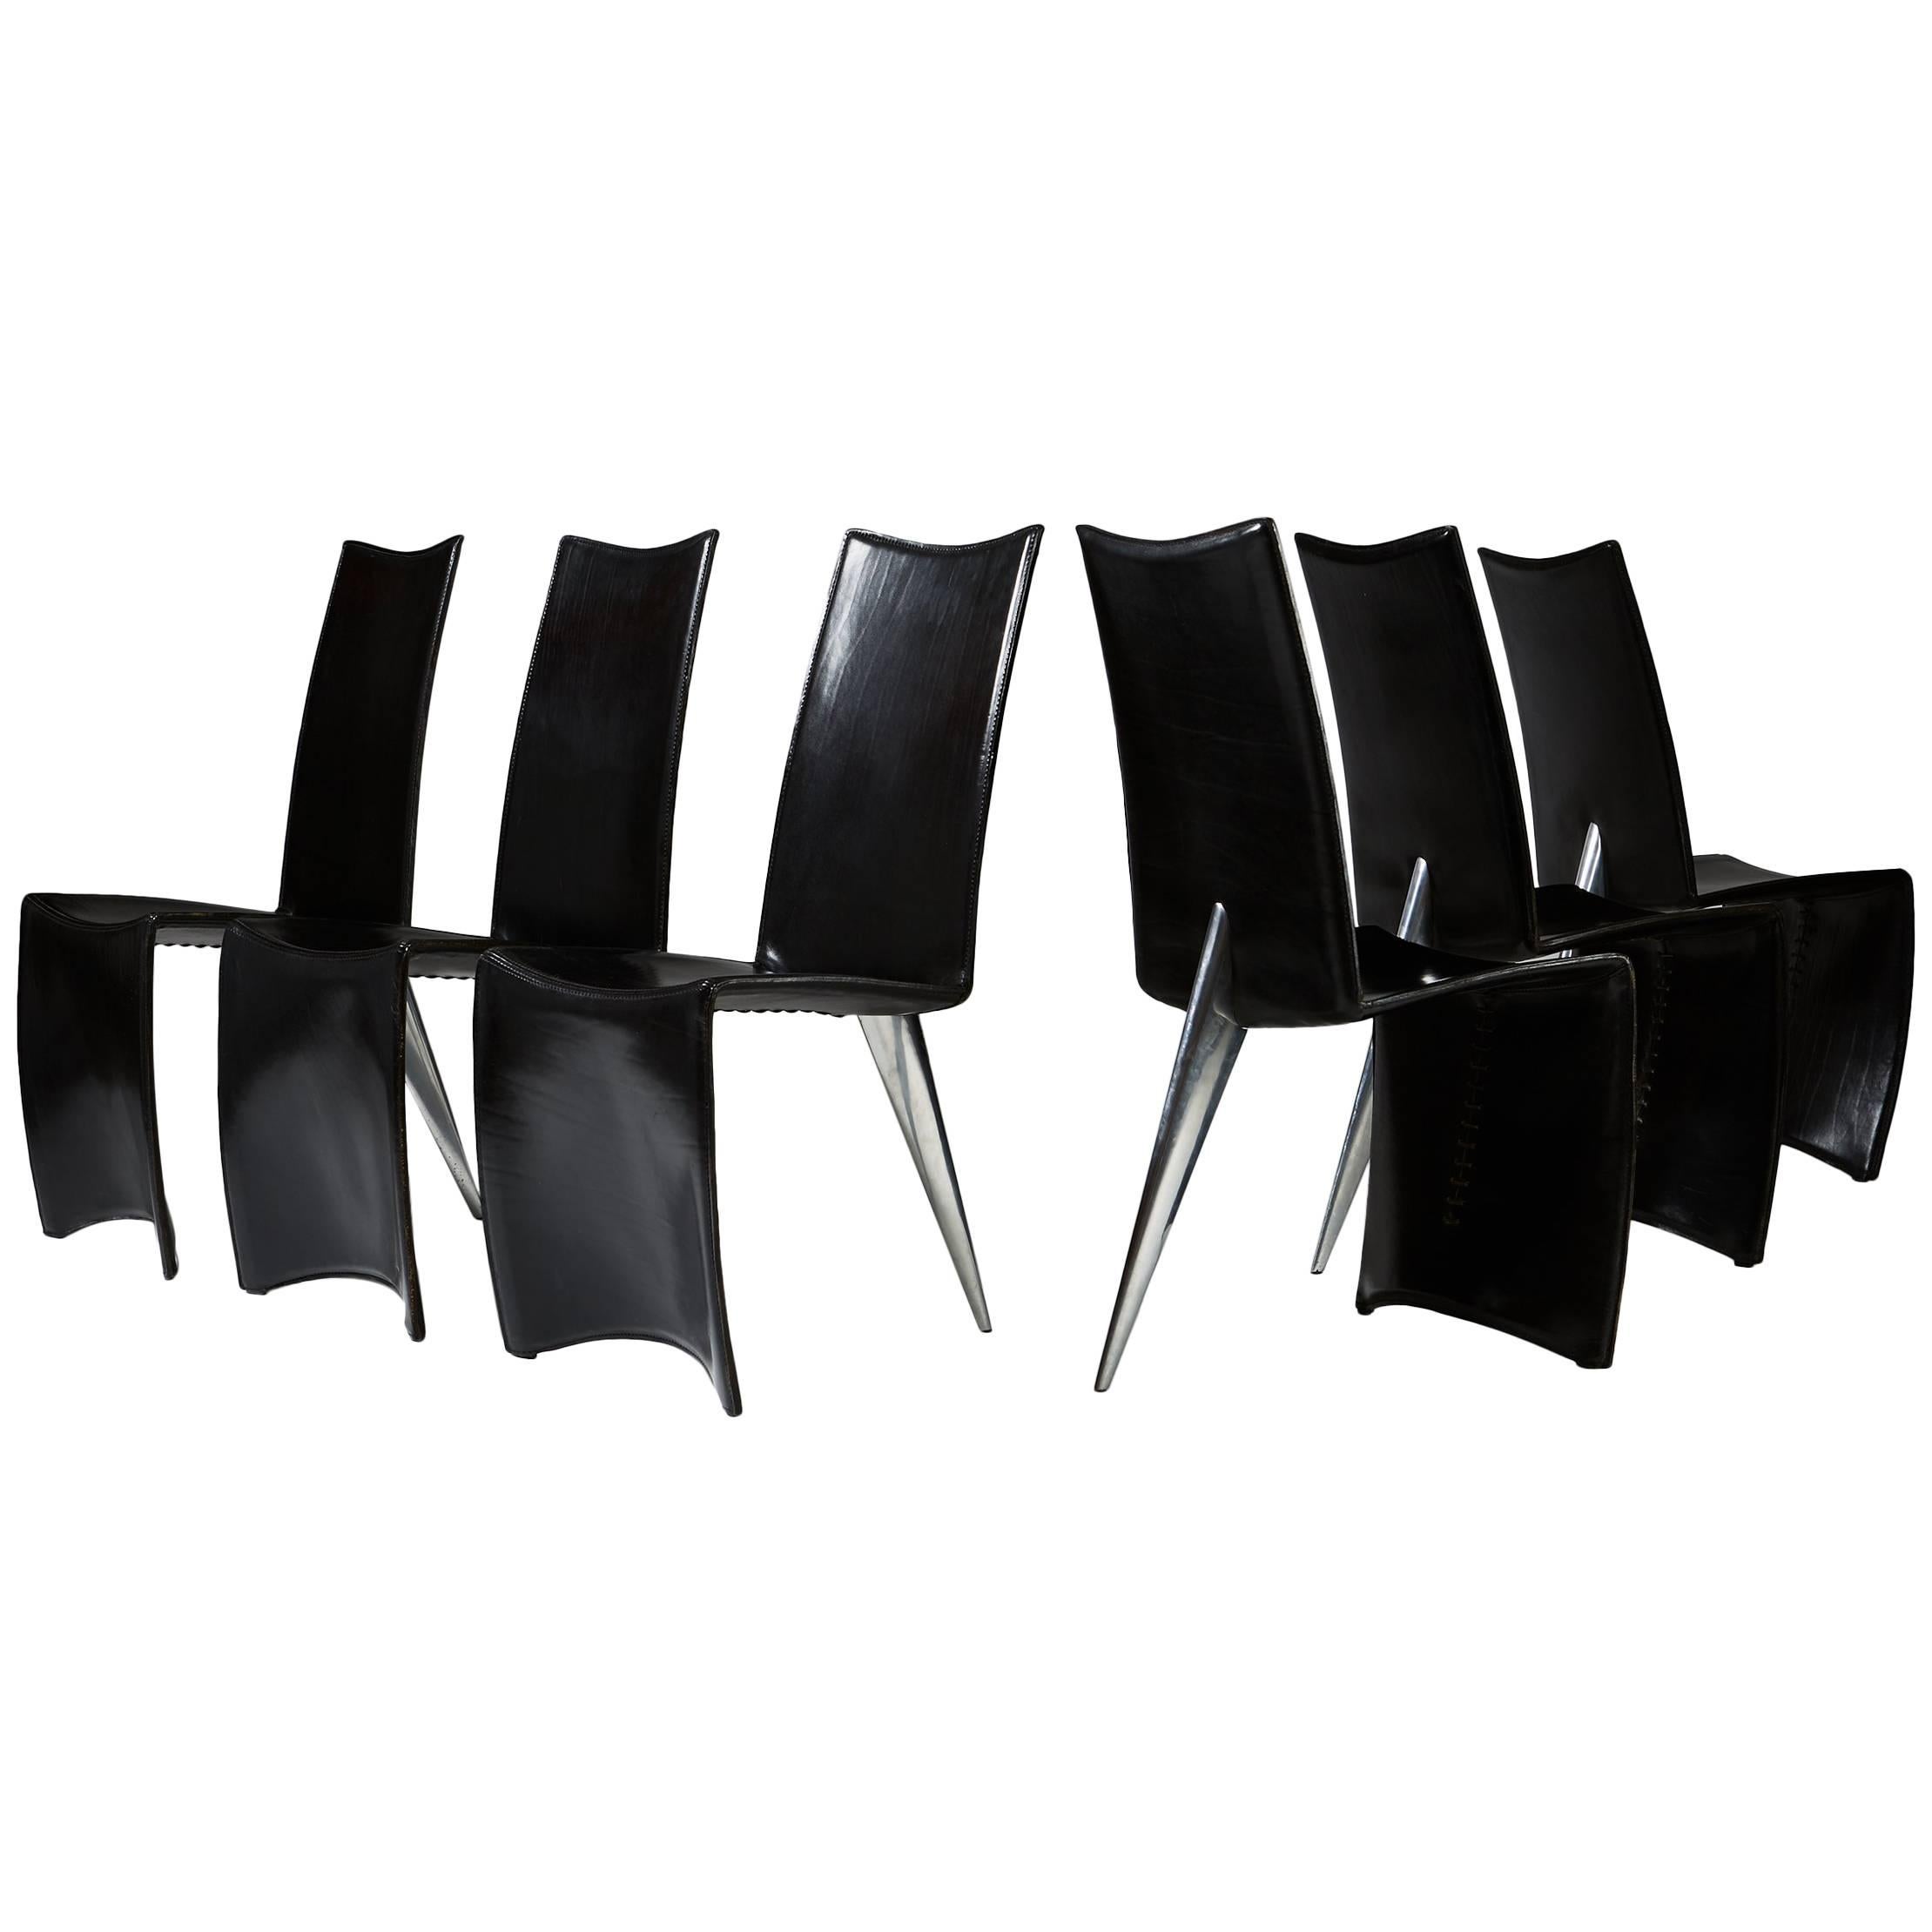 Set of Six Chairs ‘J Serie Lang’ Designed by Philippe Starck for Aleph, Italy